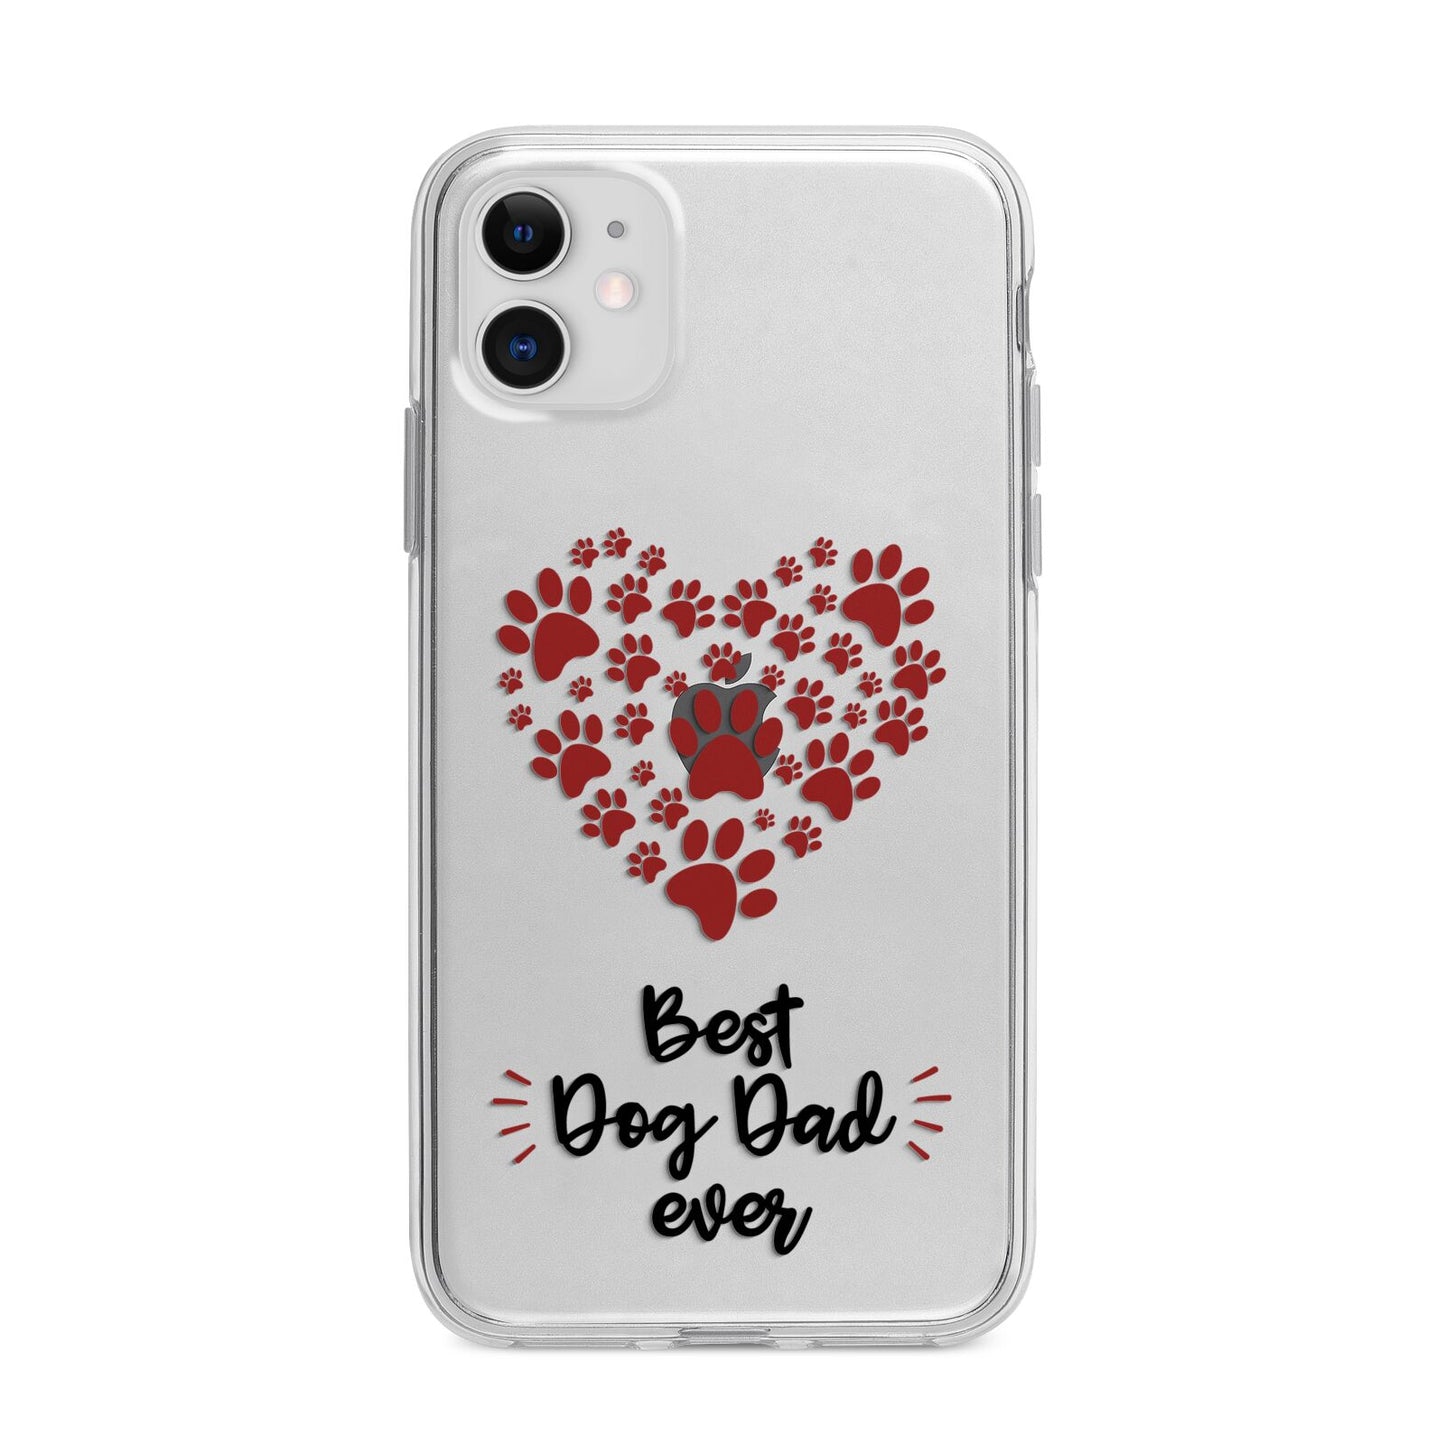 Best Dog Dad Paws Apple iPhone 11 in White with Bumper Case